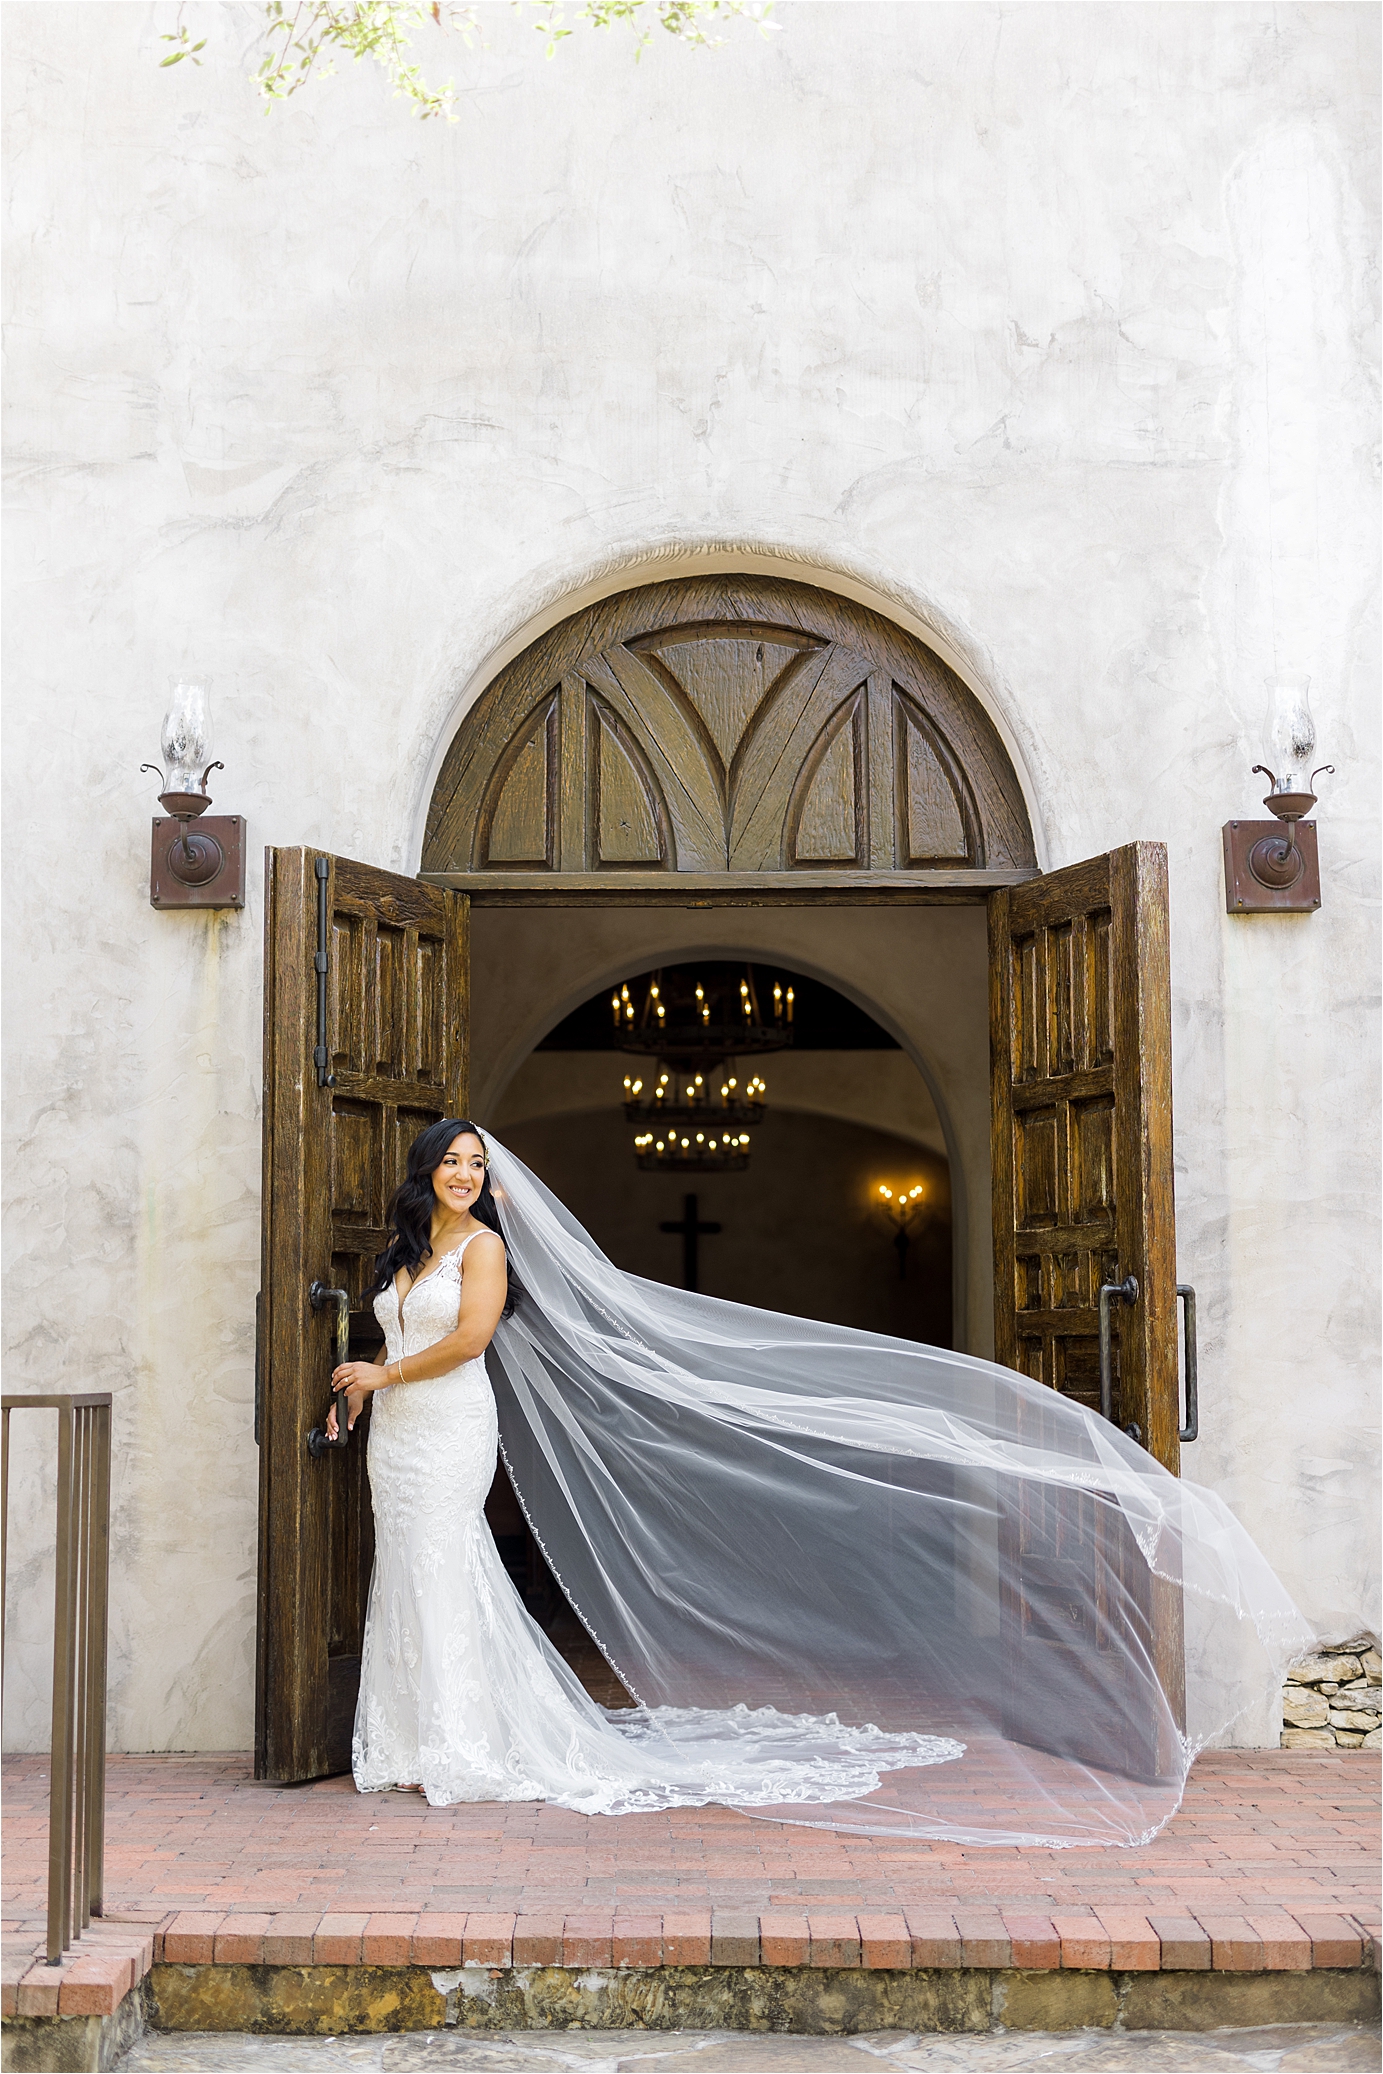 A bride looks off to the side as her veil blows in the wind in front of big, brown doors at her Mission Venue in the Texas Hill Country during her bridal Portraits